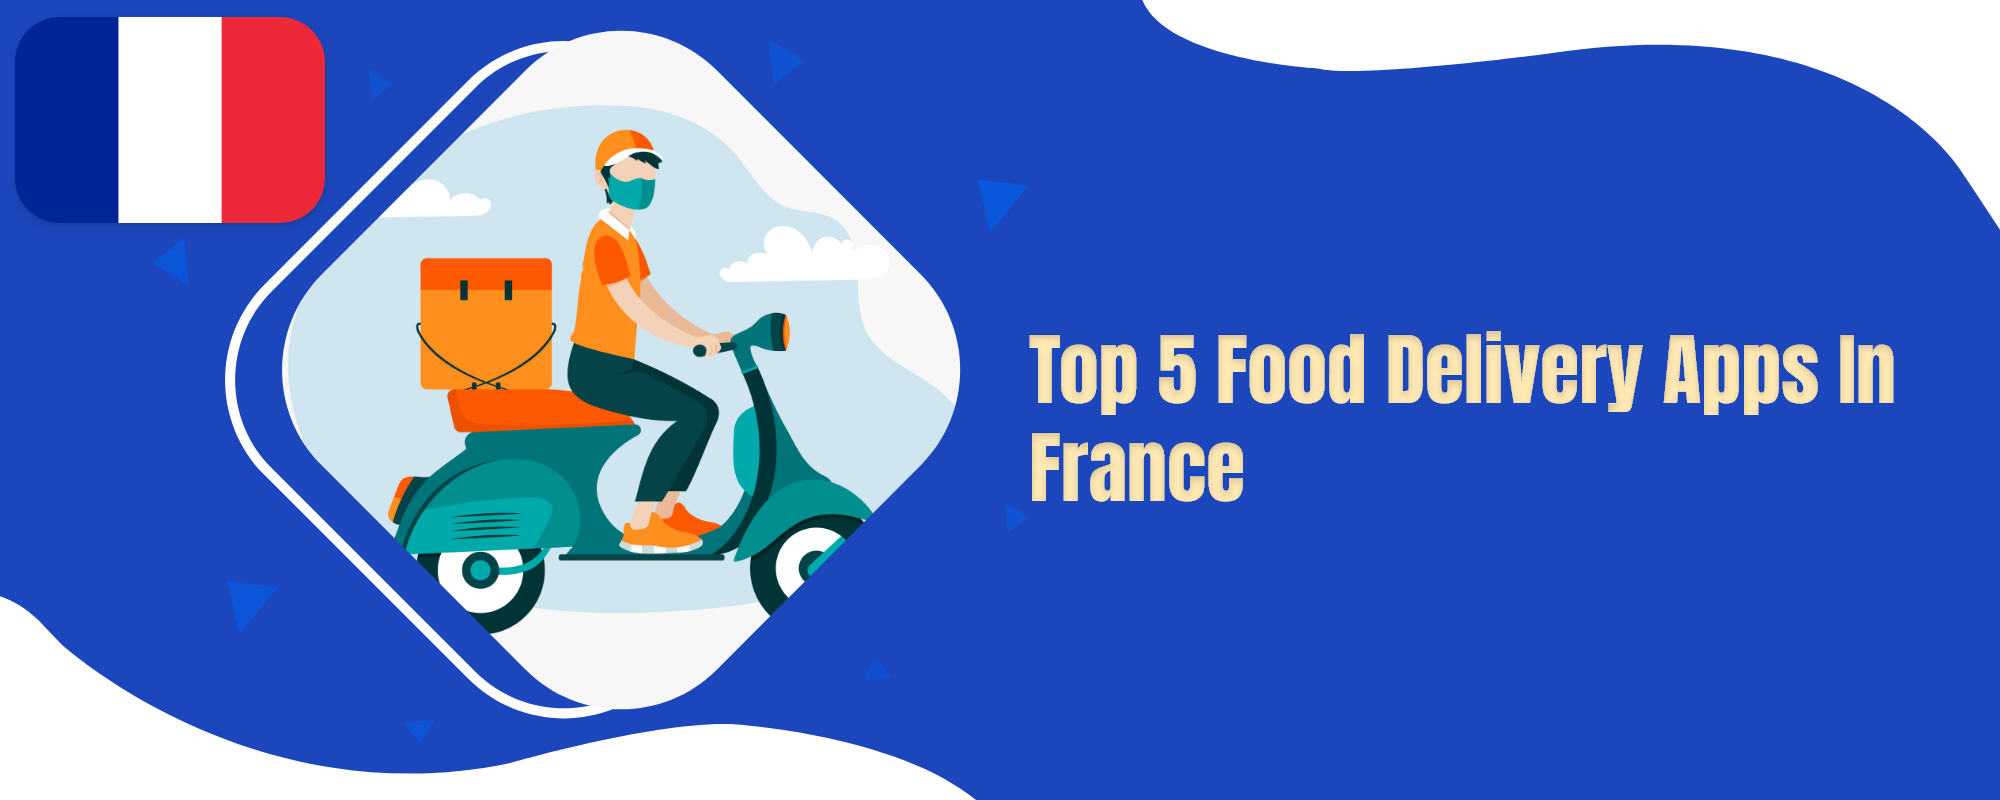 food delivery apps in france